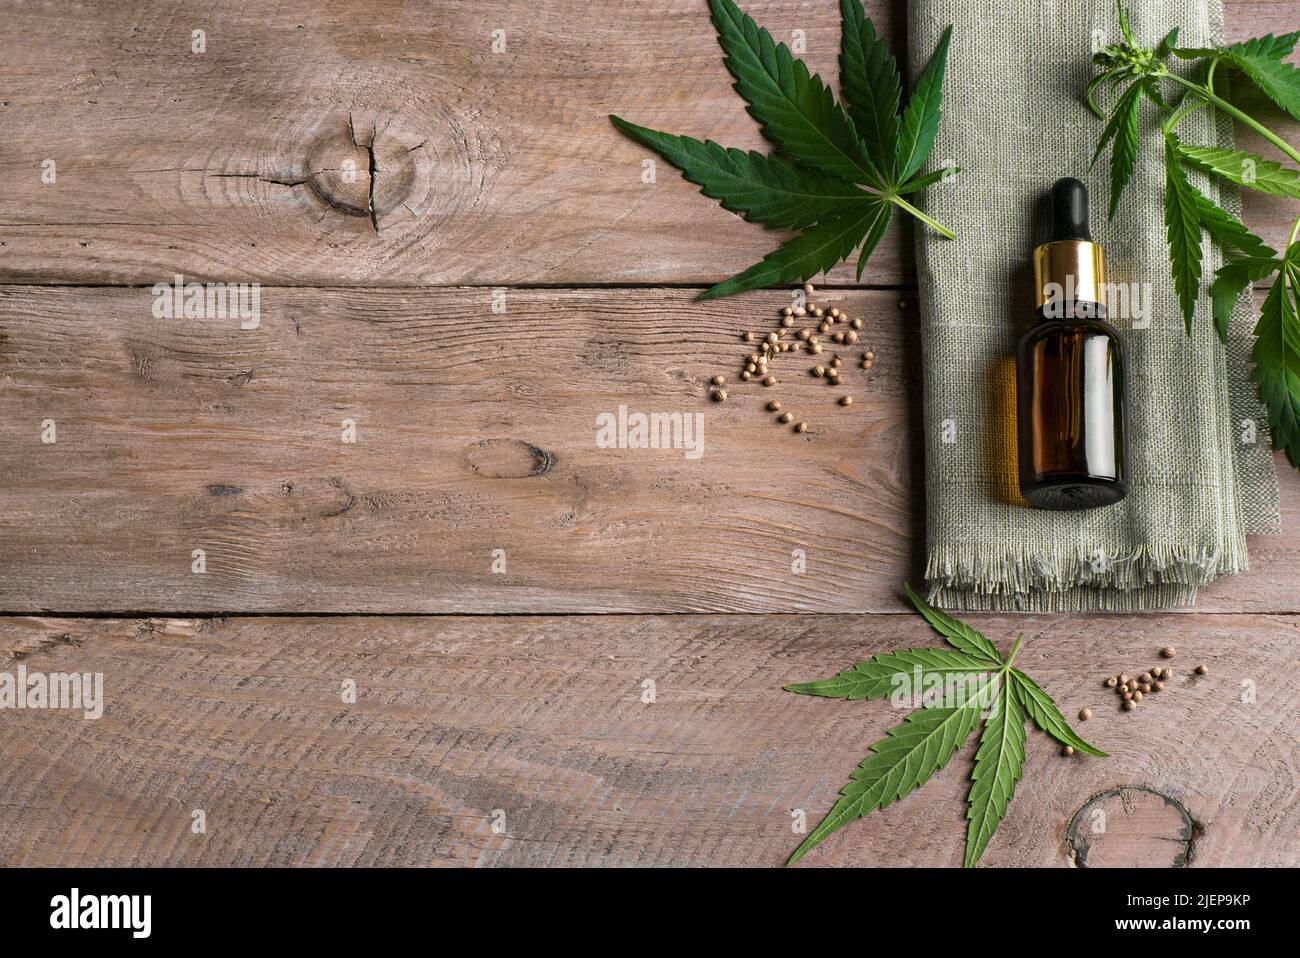 Face serum or cbd oil bottle and hemp plant green leaves on wooden background, copy space. Alternative medicine, cbd oil and organic skin care concept Stock Photo